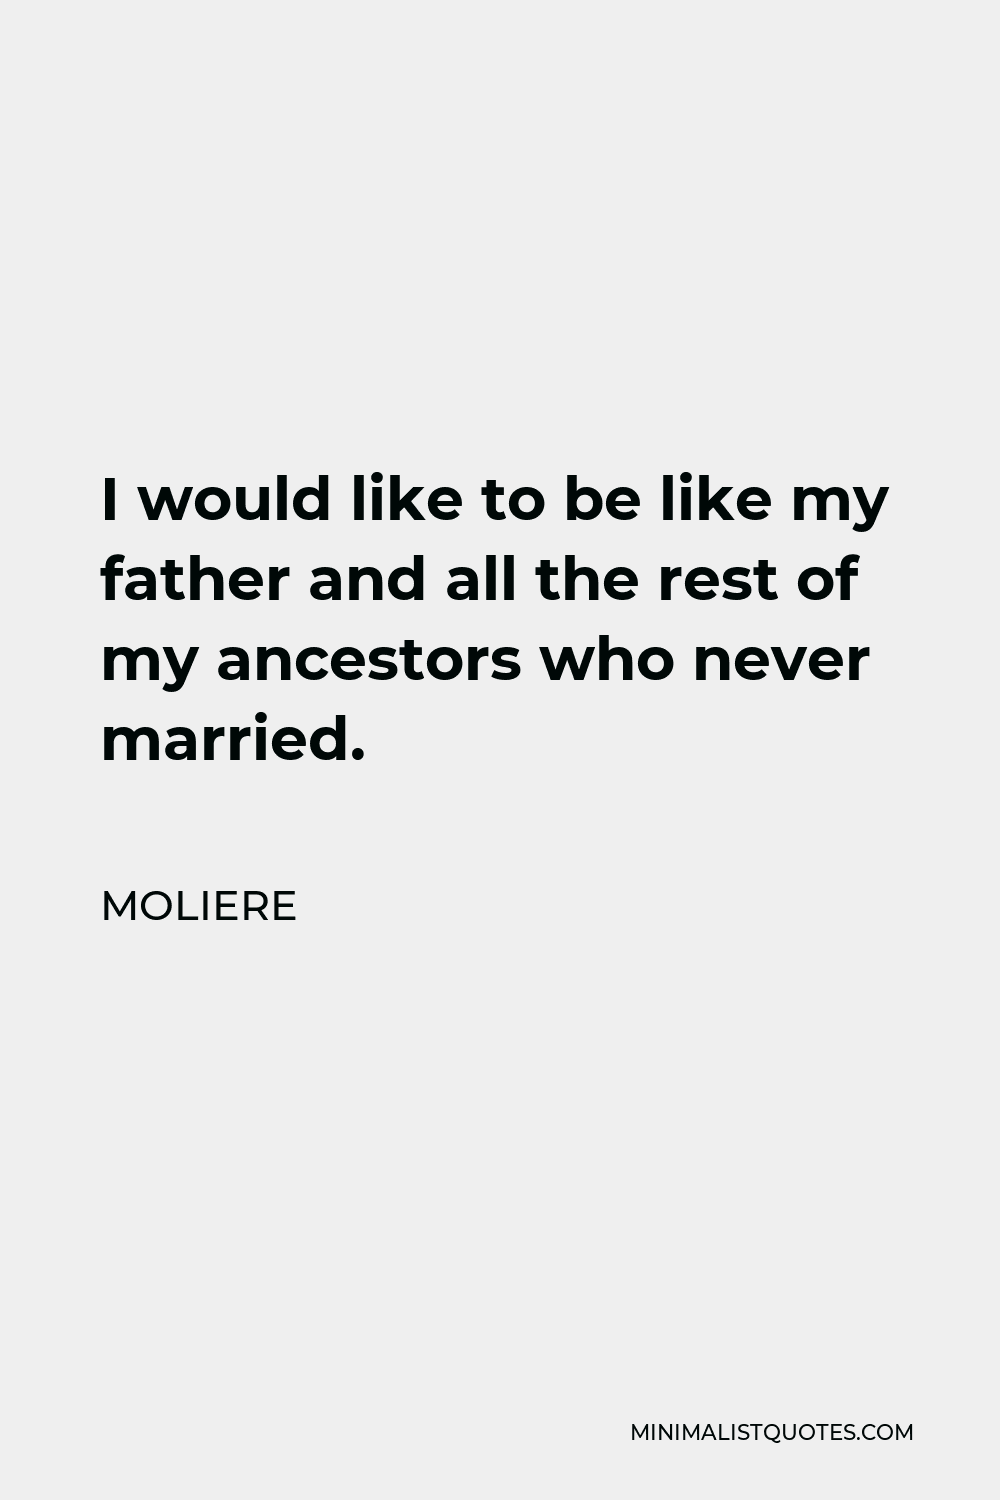 Moliere Quote - I would like to be like my father and all the rest of my ancestors who never married.